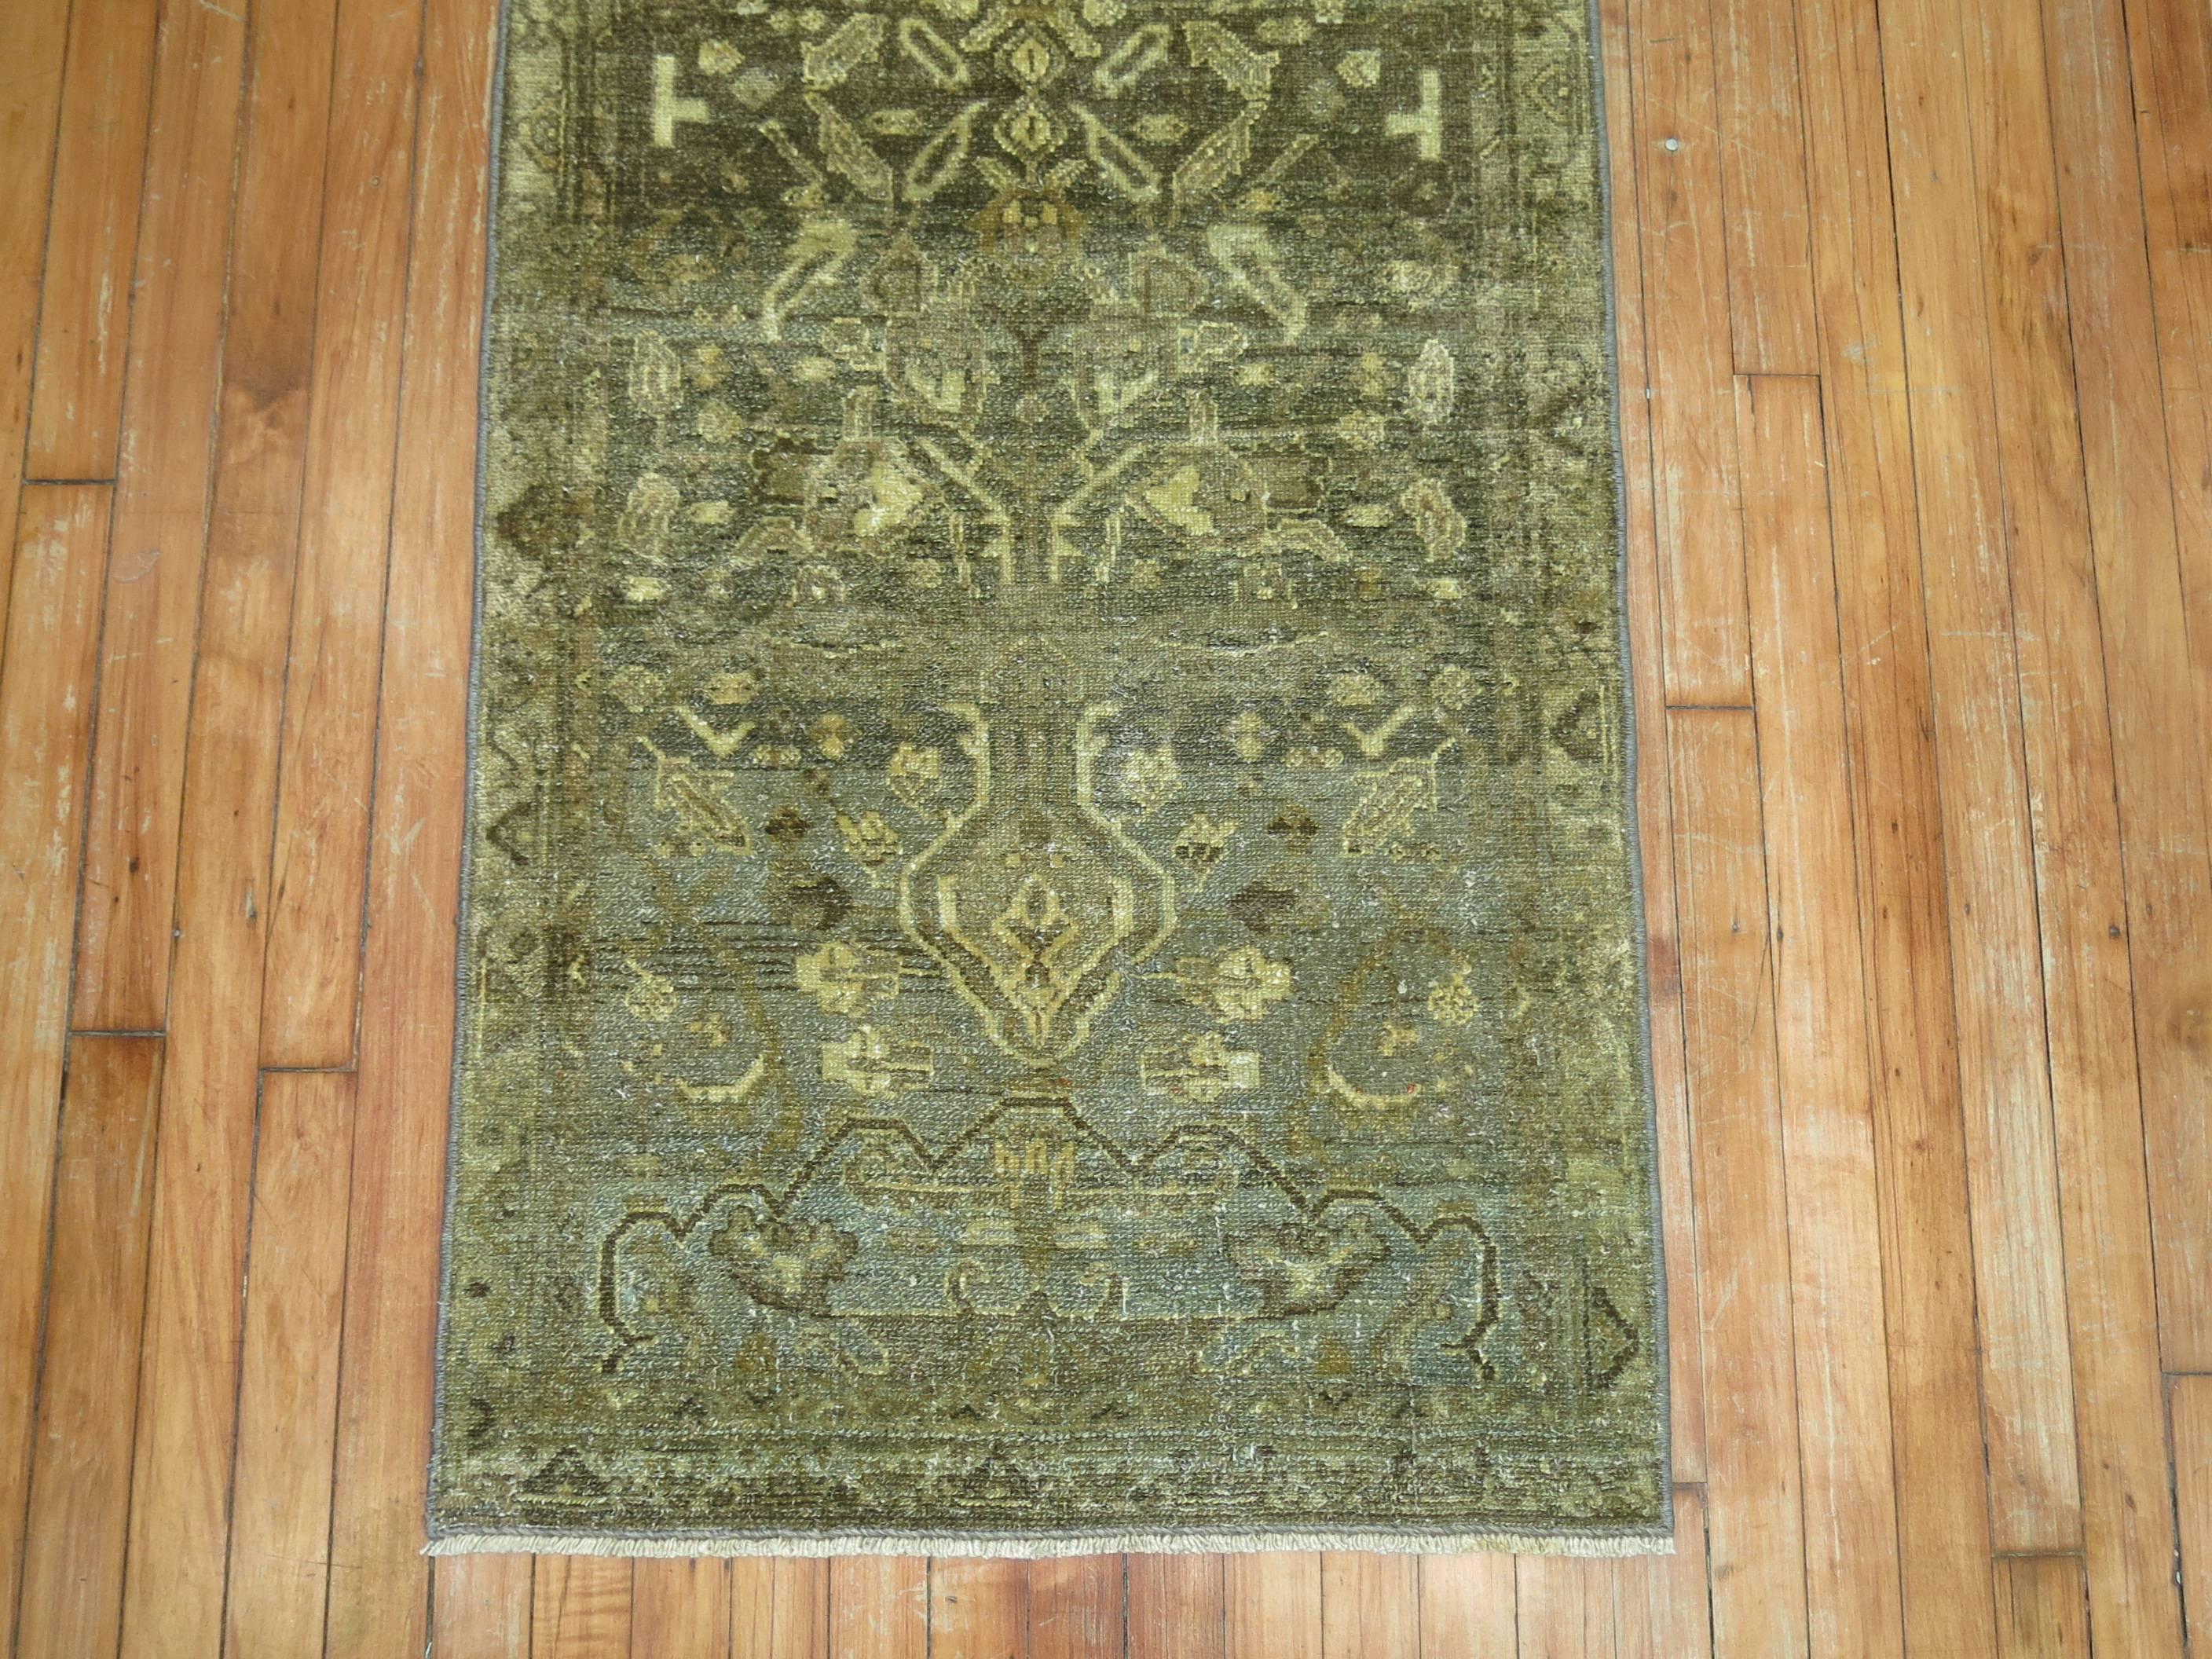 Early 20th century Persian Malayer rug in brown and green tones.

Measures: 2'5